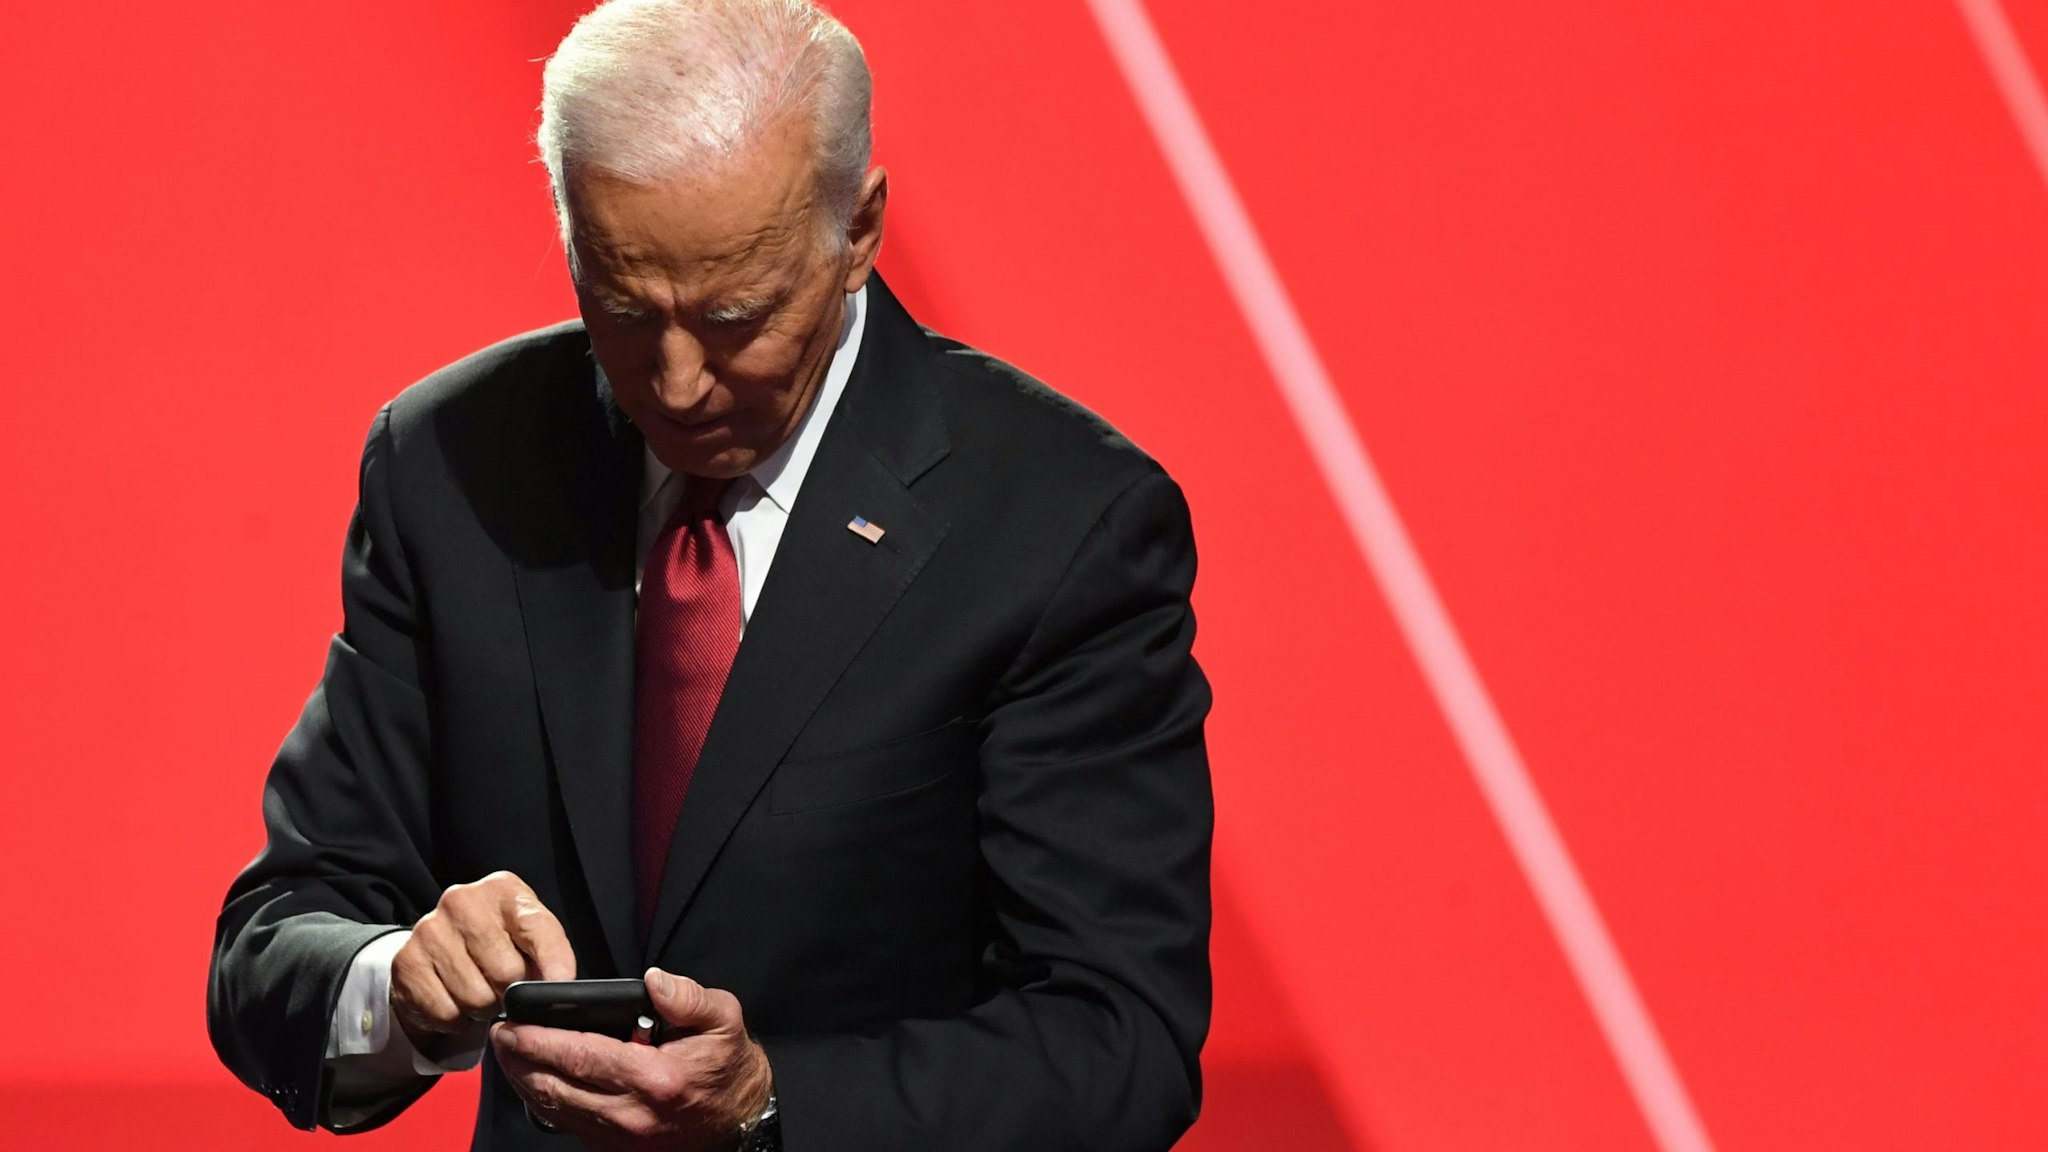 Democratic presidential hopeful former US Vice President Joe Biden looks at his phone after the fourth Democratic primary debate of the 2020 presidential campaign season co-hosted by The New York Times and CNN at Otterbein University in Westerville, Ohio on October 15, 2019. (Photo by SAUL LOEB / AFP) (Photo by SAUL LOEB/AFP via Getty Images)